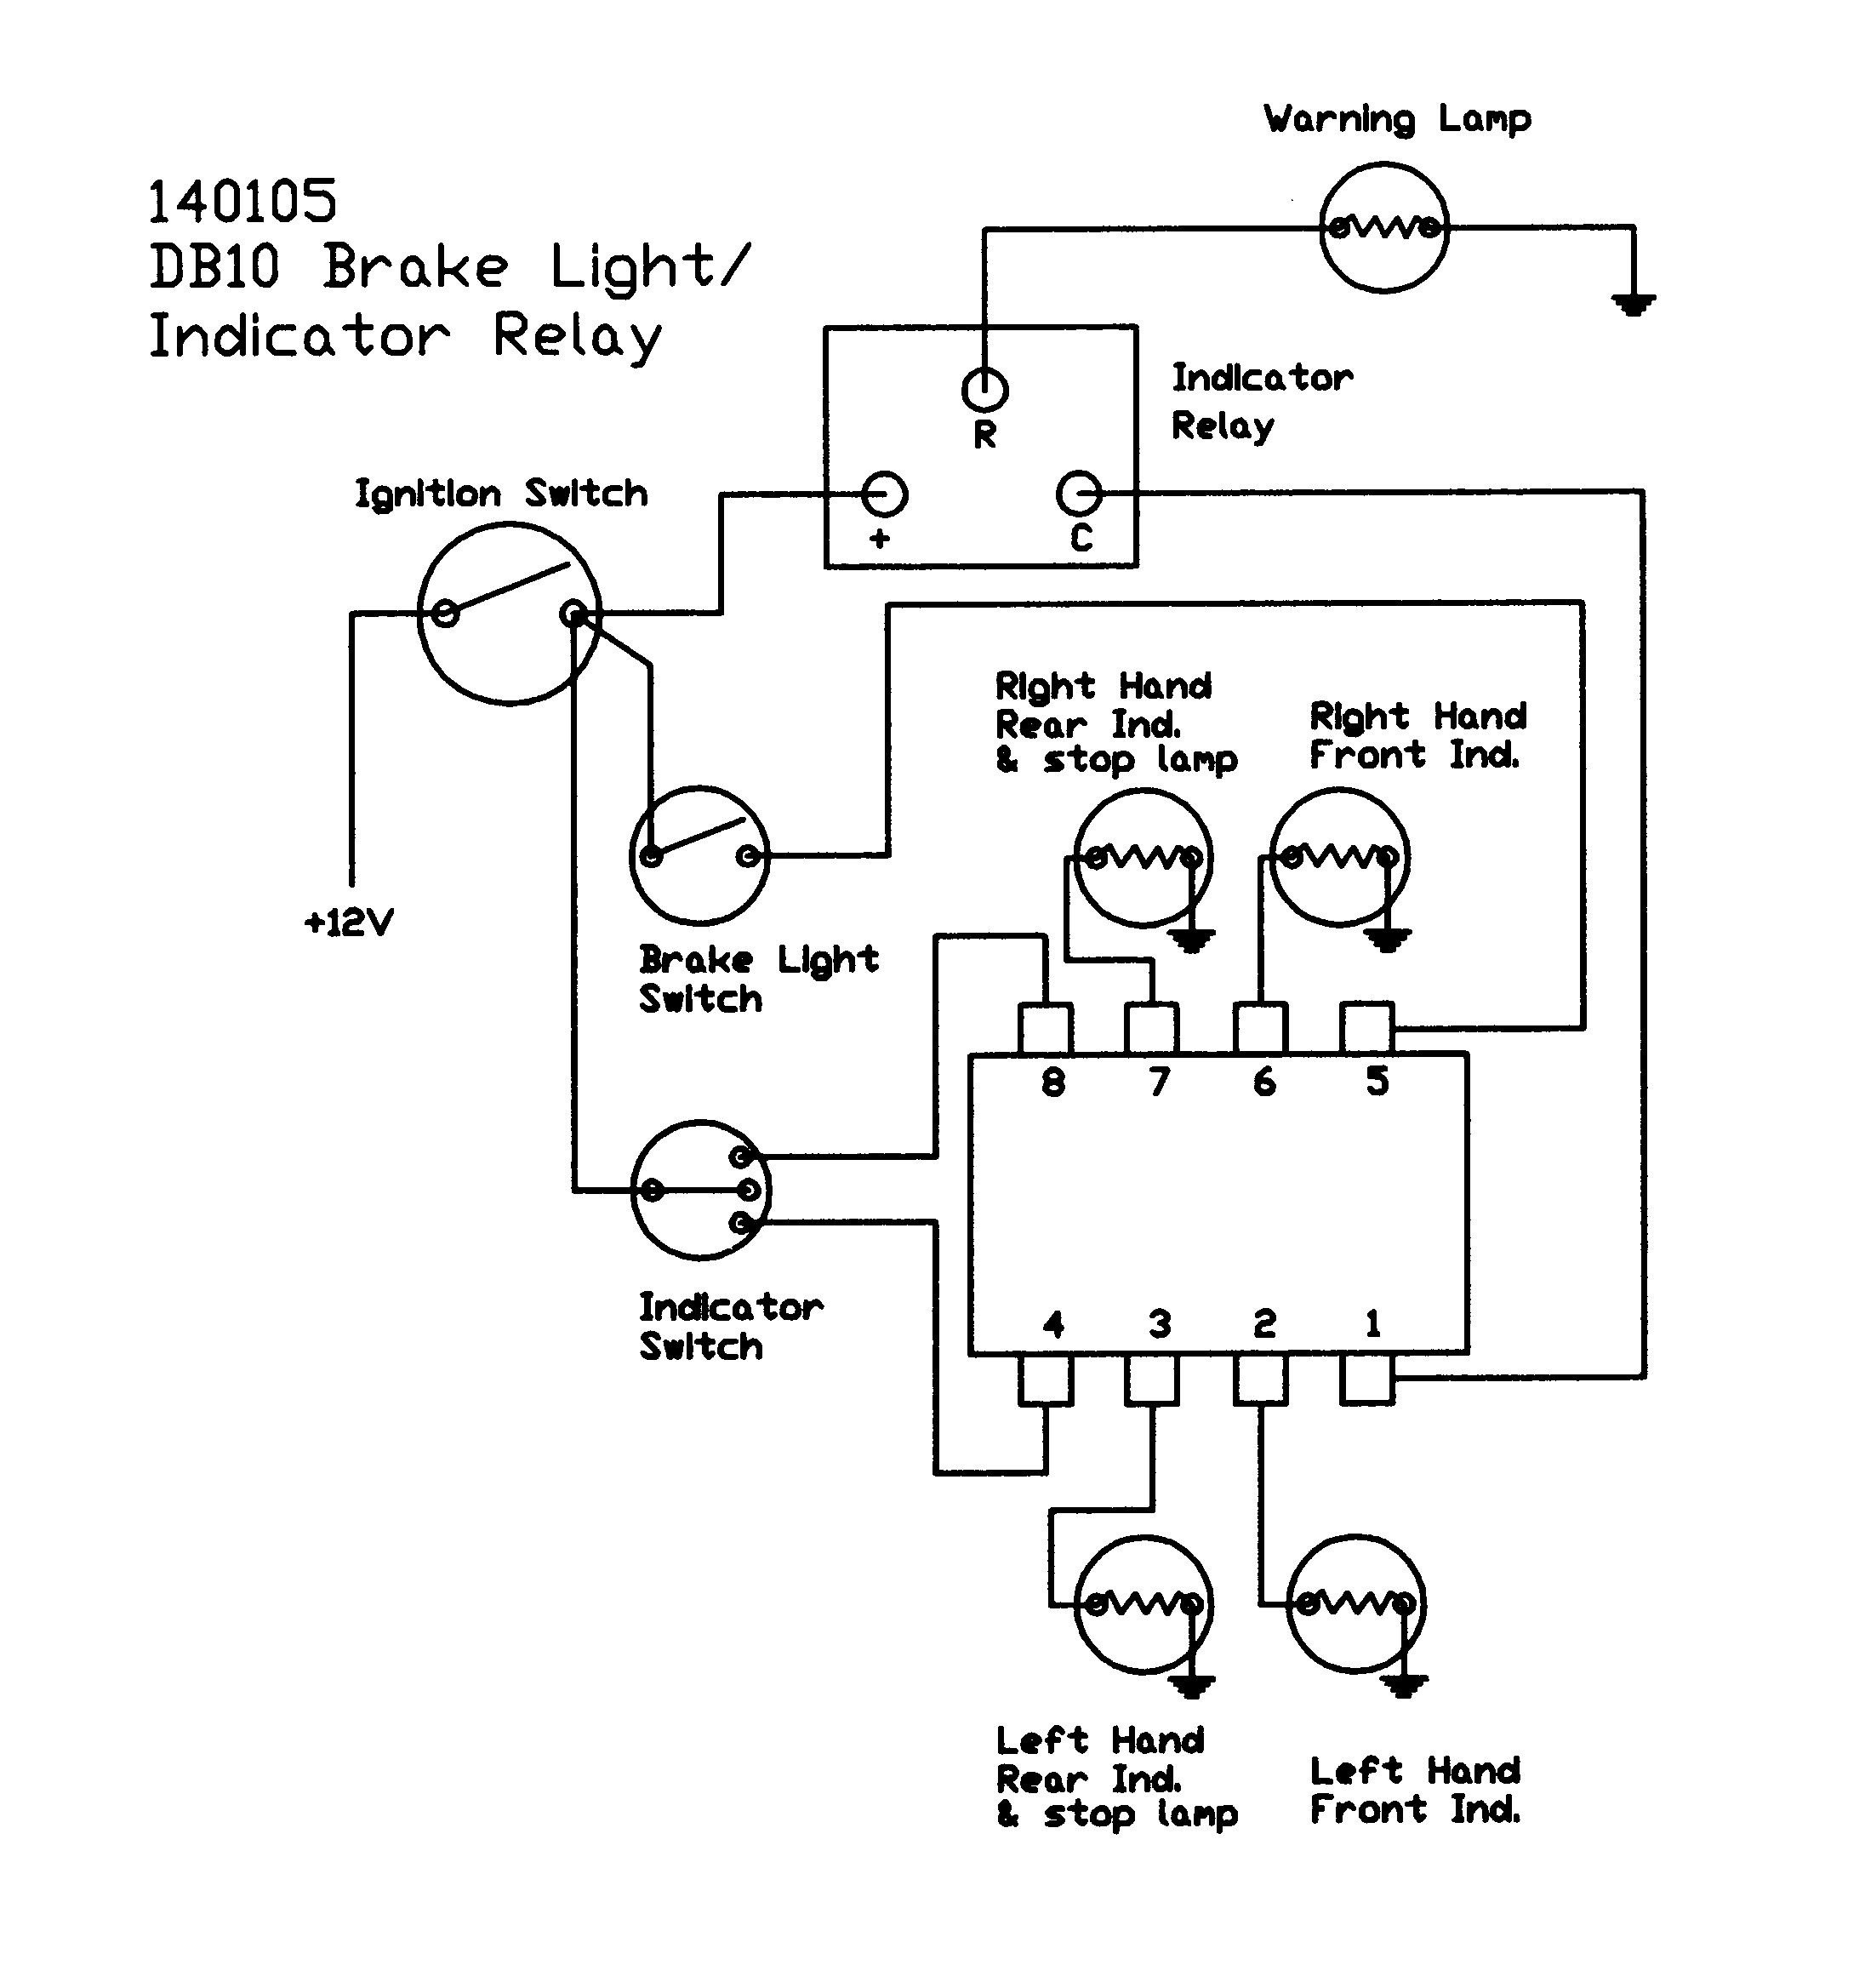 Ford F250 7 Pin Wiring Diagram Lukaszmira Collection Solutions Ford F250 Wiring Diagram For Trailer Lights In 6 Pin Connector And Og Wiring Diagram